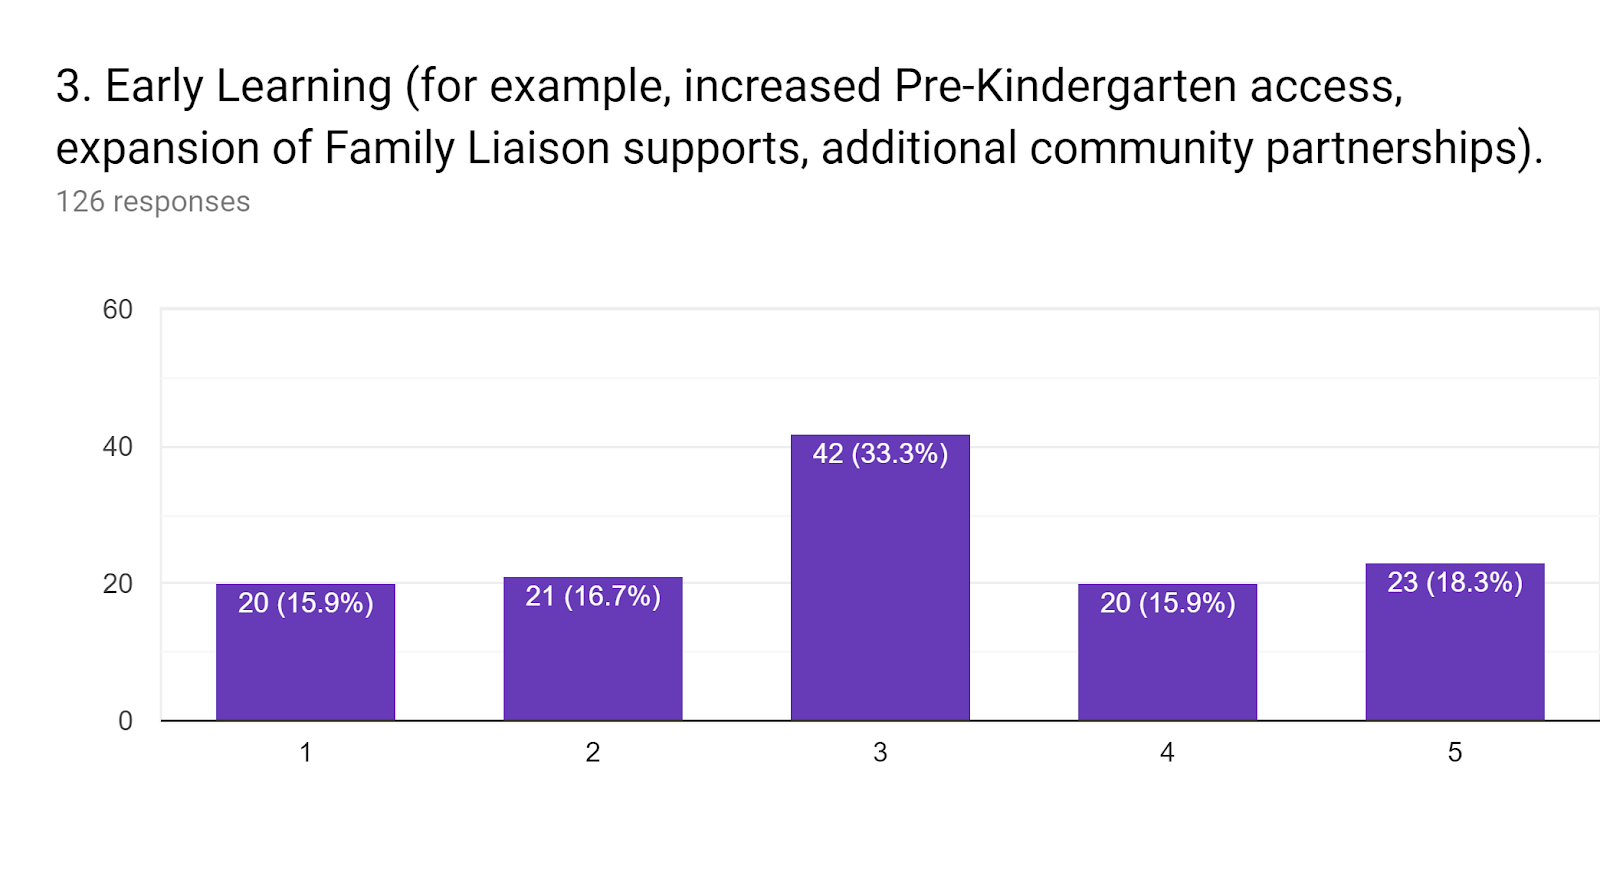 Forms response chart. Question title: 3.	Early Learning (for example, increased Pre-Kindergarten access, expansion of Family Liaison supports, additional community partnerships).. Number of responses: 126 responses.